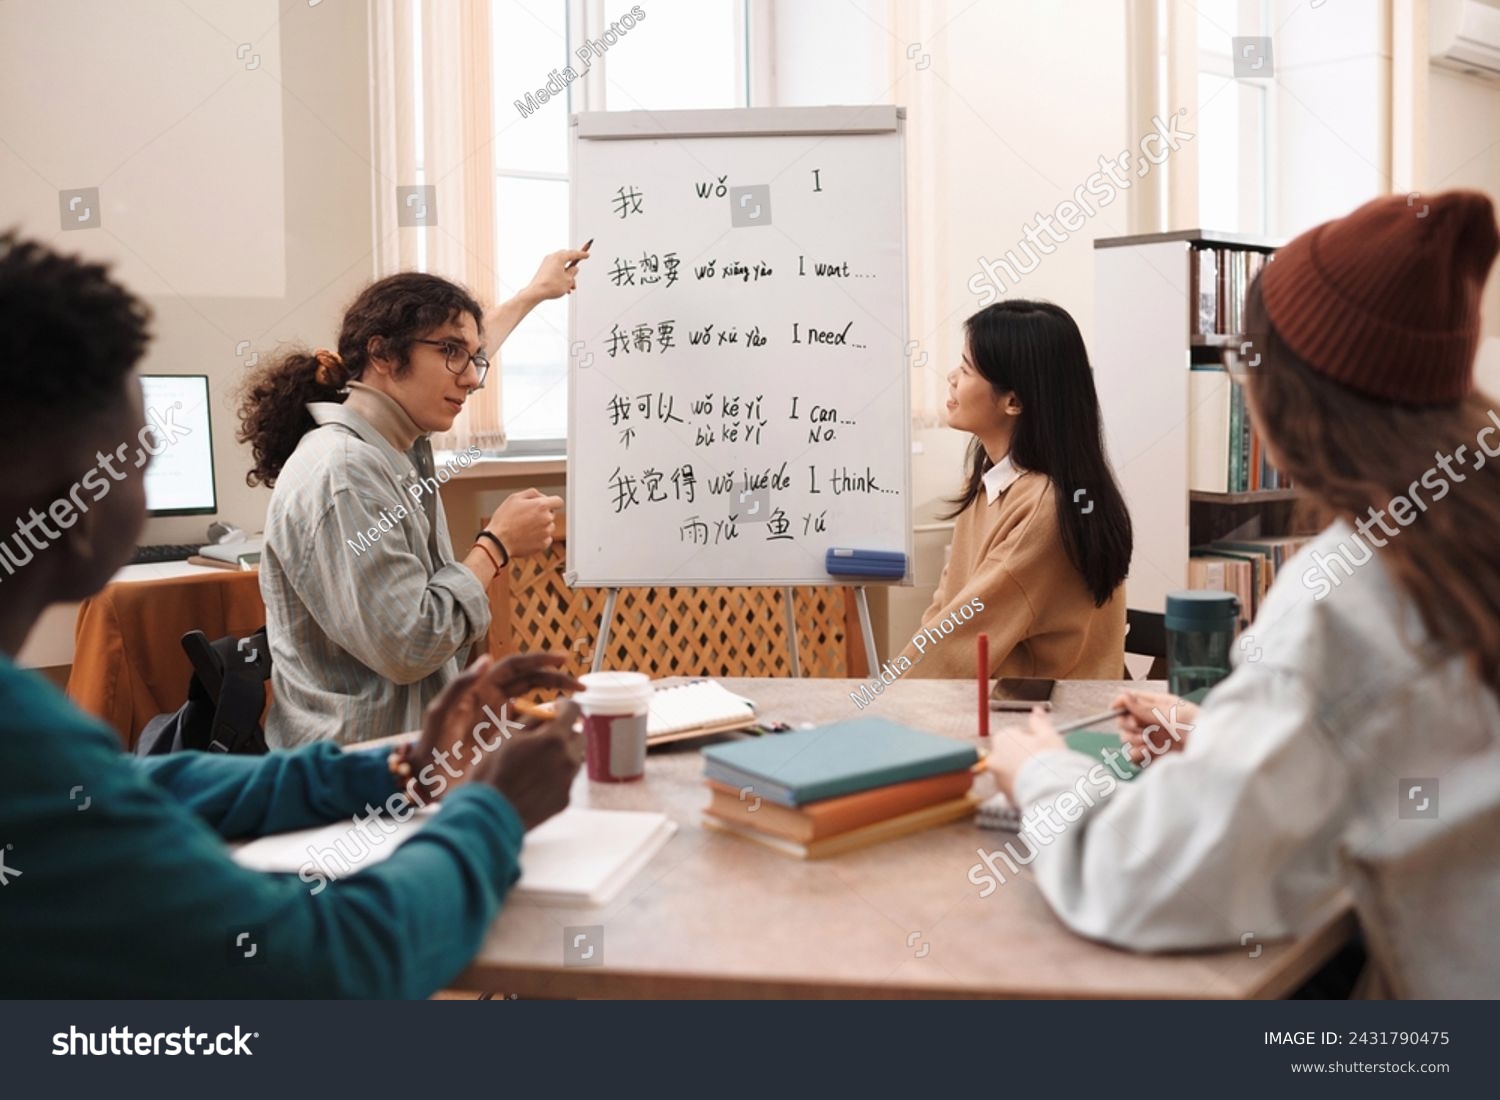 Side view portrait of male student answering questions during Chinese language class and pointing at whiteboard with hieroglyphs #2431790475